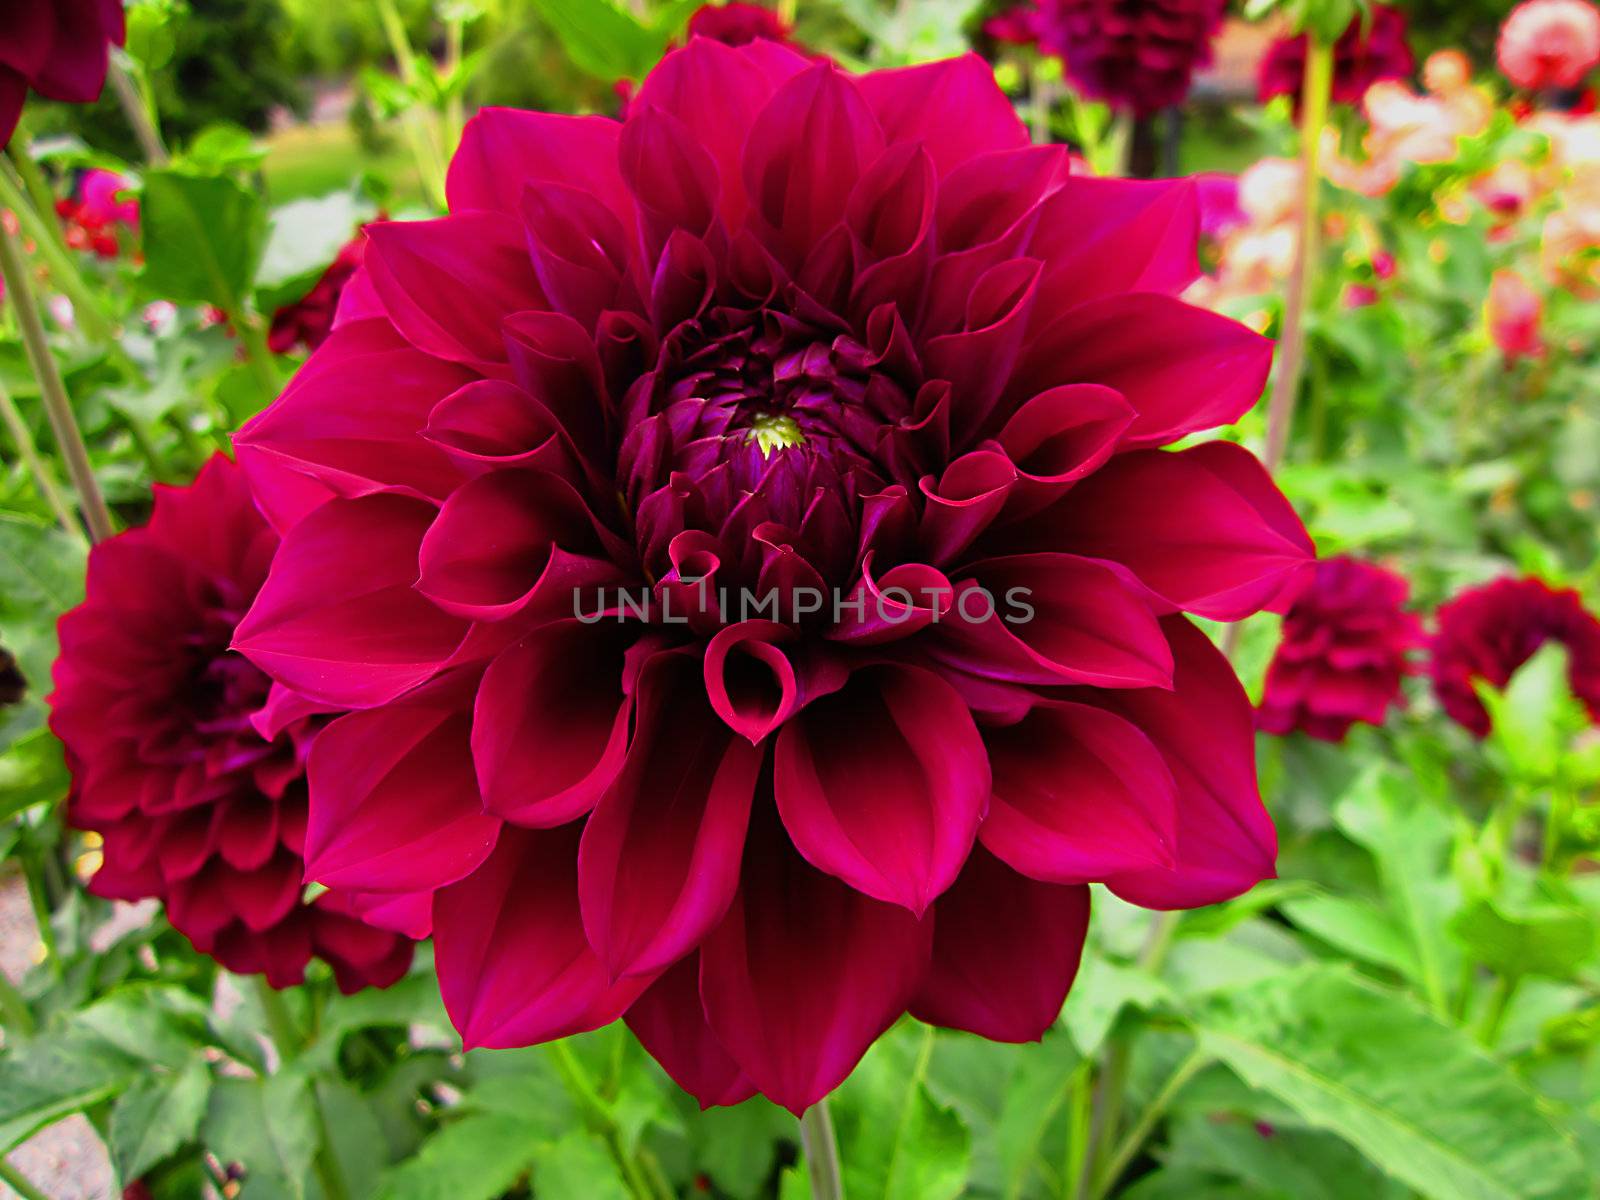 The Dahlia is a perennial plant that is cultivated for its wide variety of colored flower heads.  They are native to Mexico and Central America.